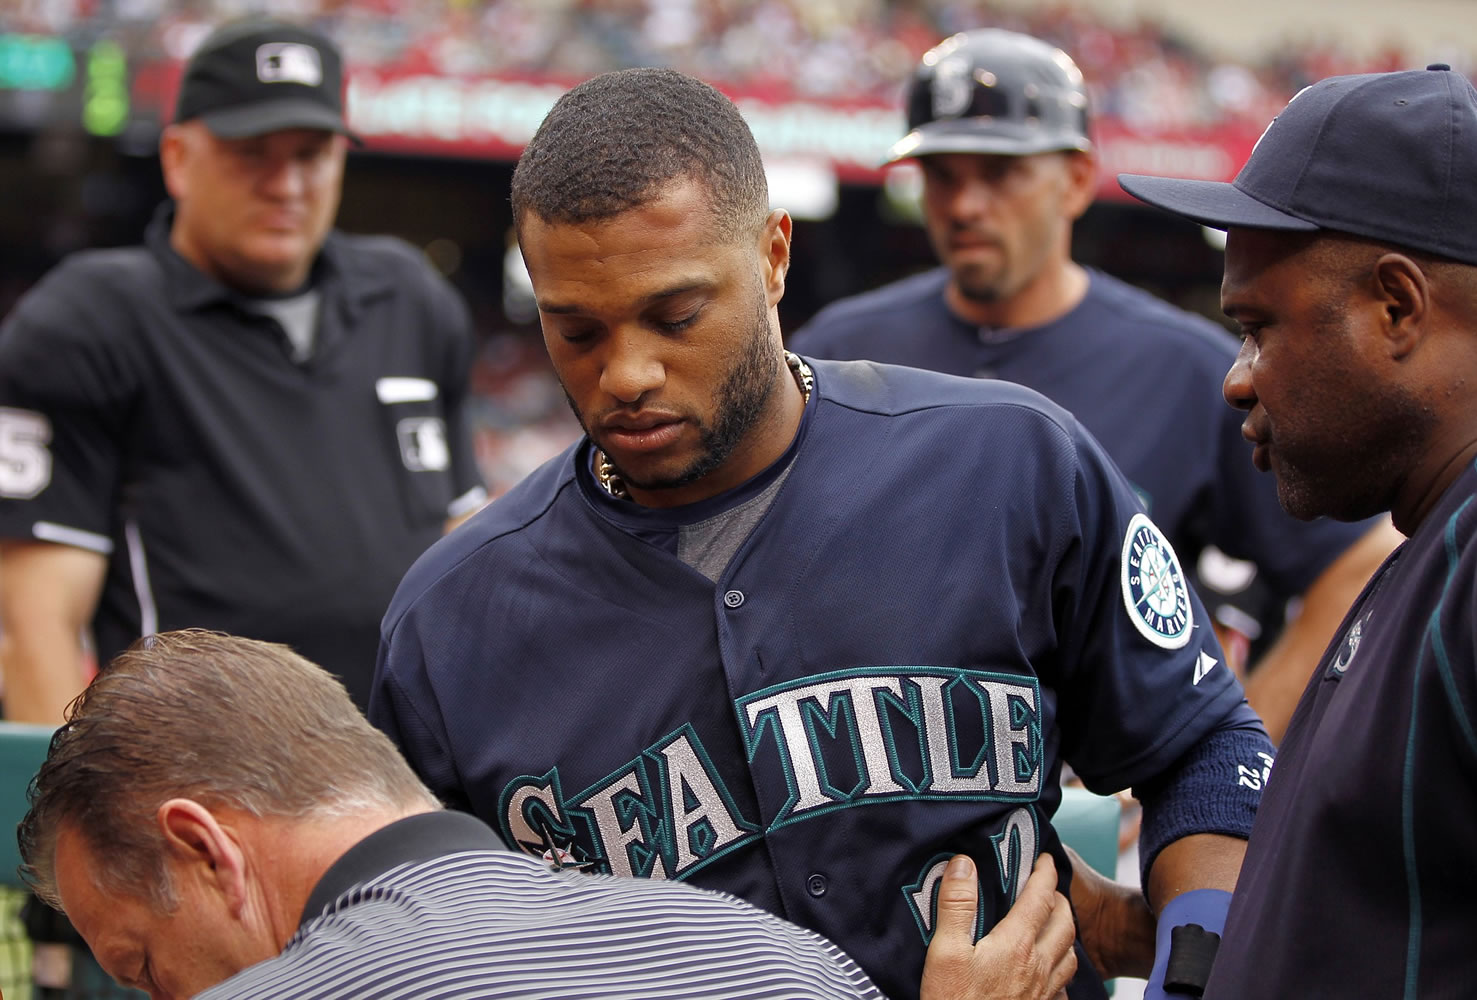 Seattle's Robinson Cano, center, is taken from the bench with a knot on his forehead after an overthrow by the Los Angeles Angels during infield warmups to begin the seventh inning in Anaheim, Calif., Saturday, June 27, 2015. Cano was removed from the game.